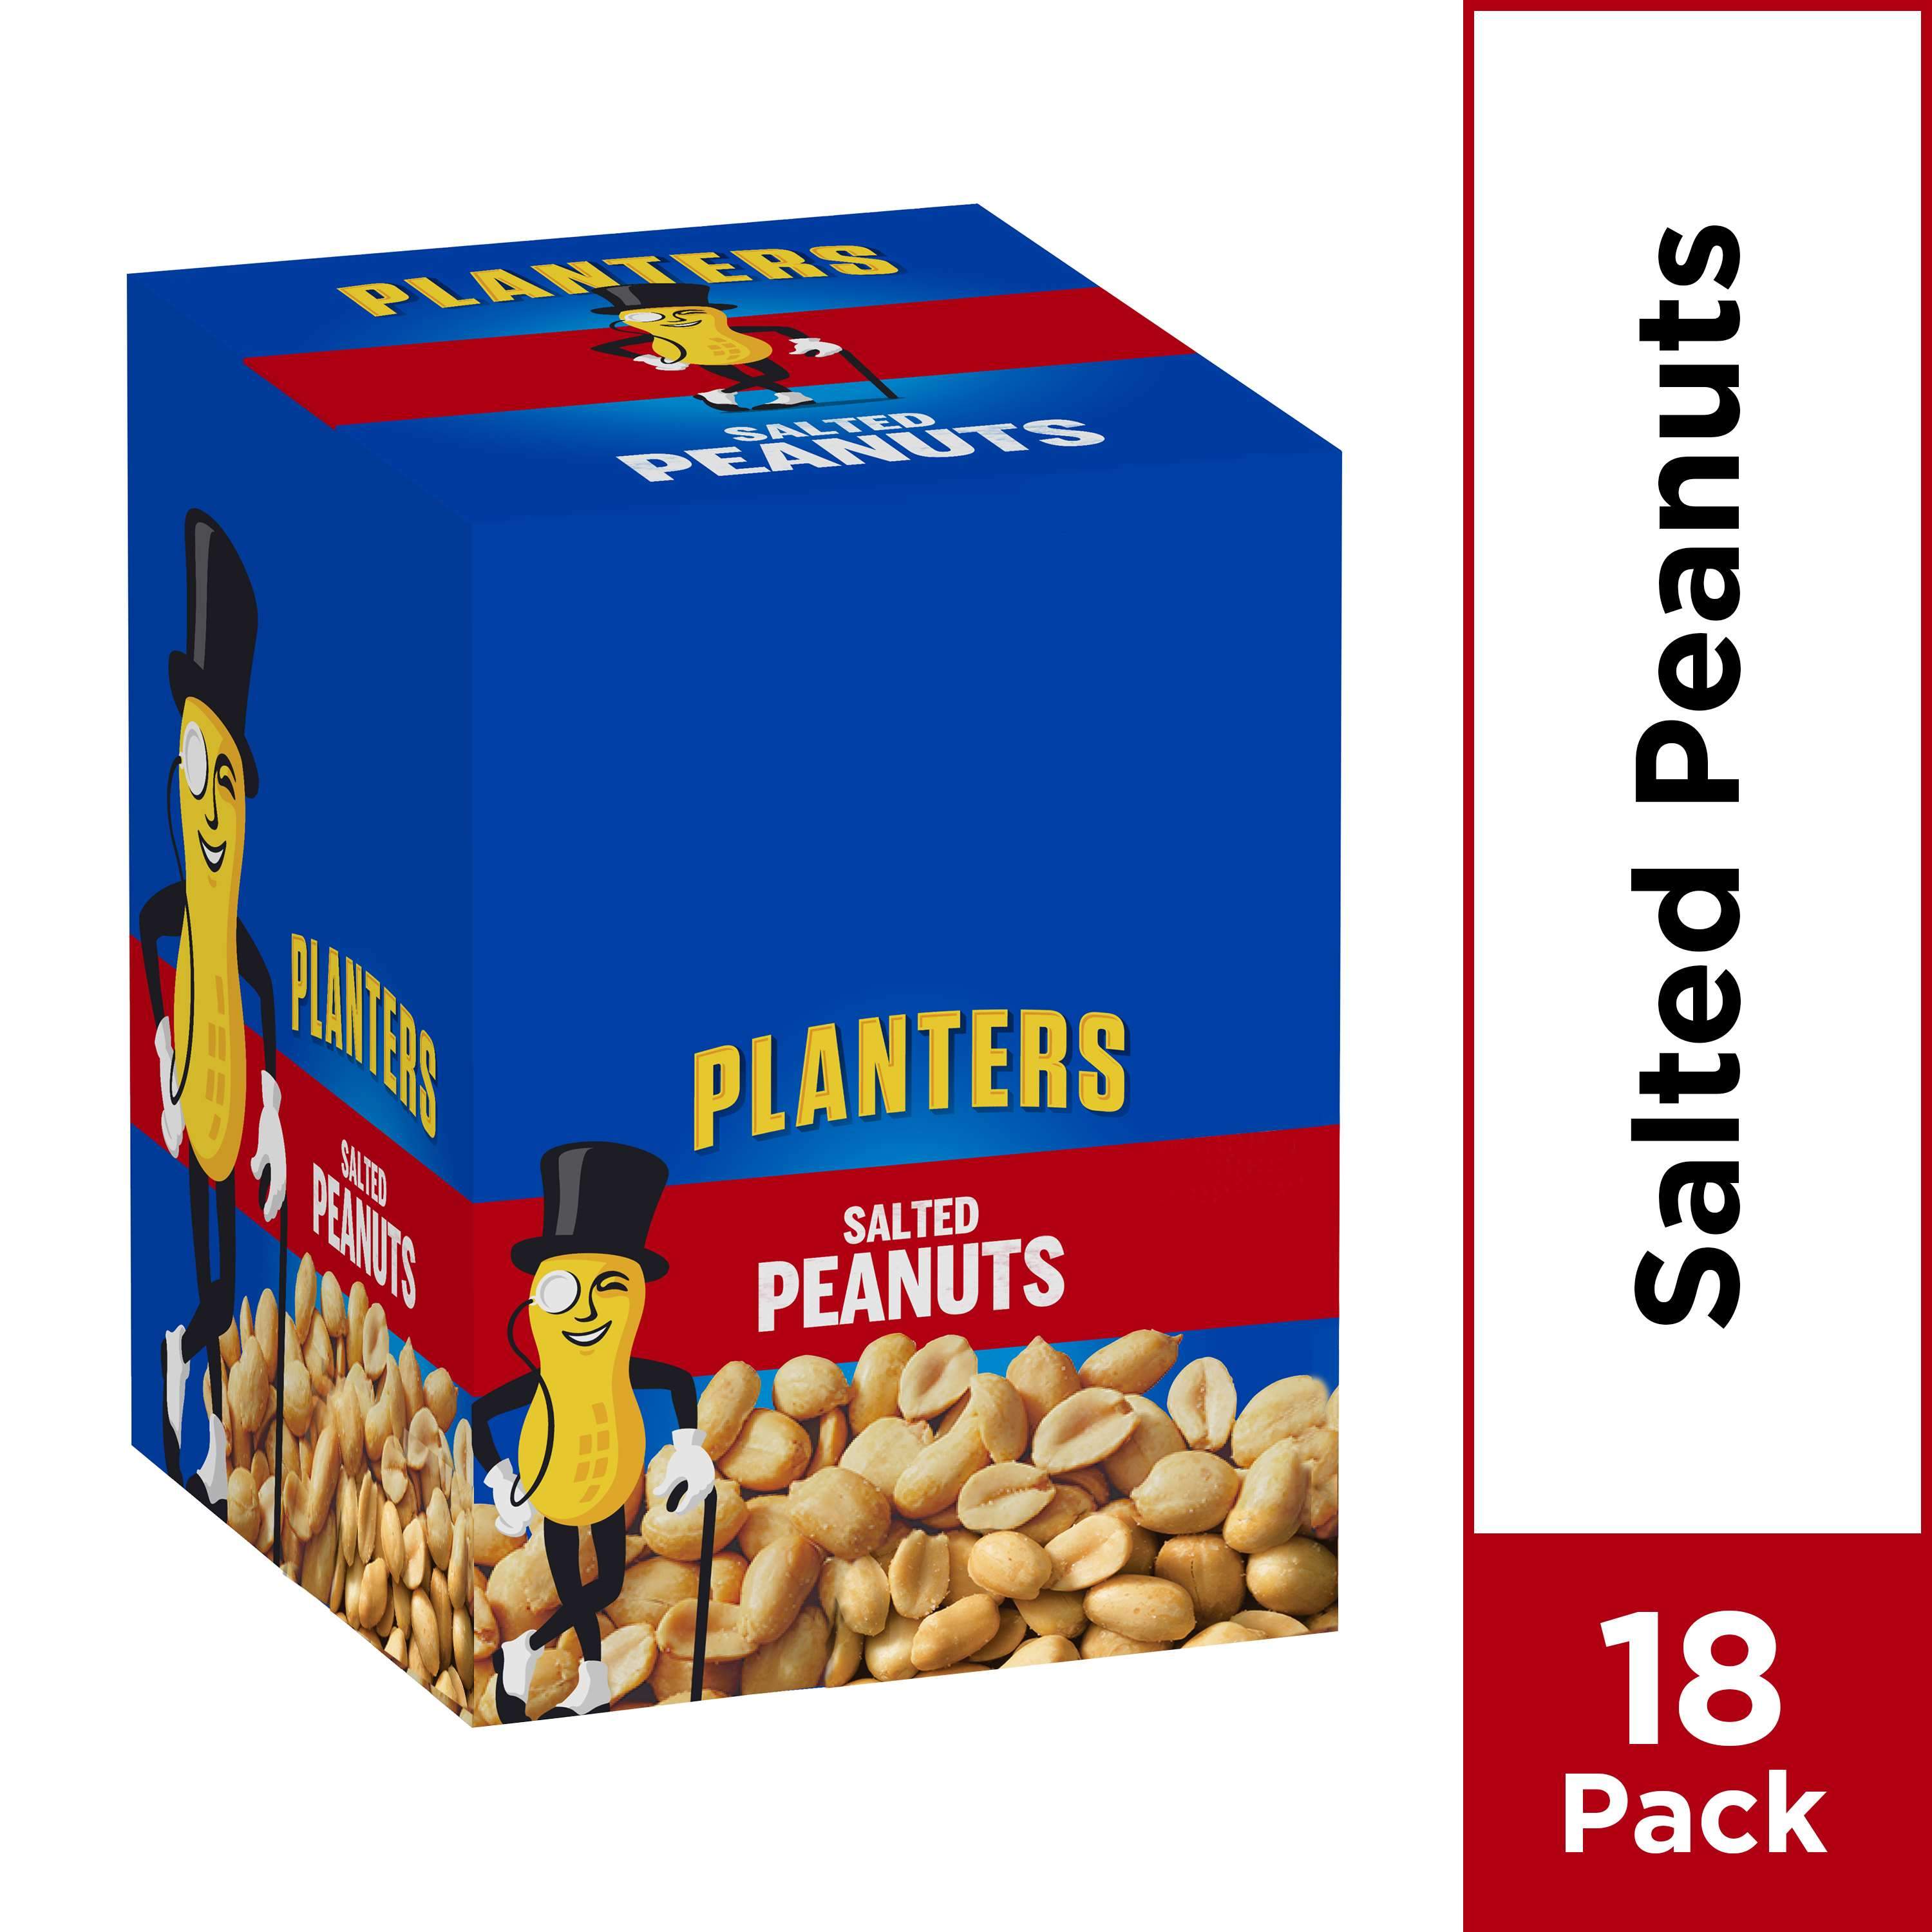 Planters Peanuts Planters Salted 1.75 Oz-18 Count 